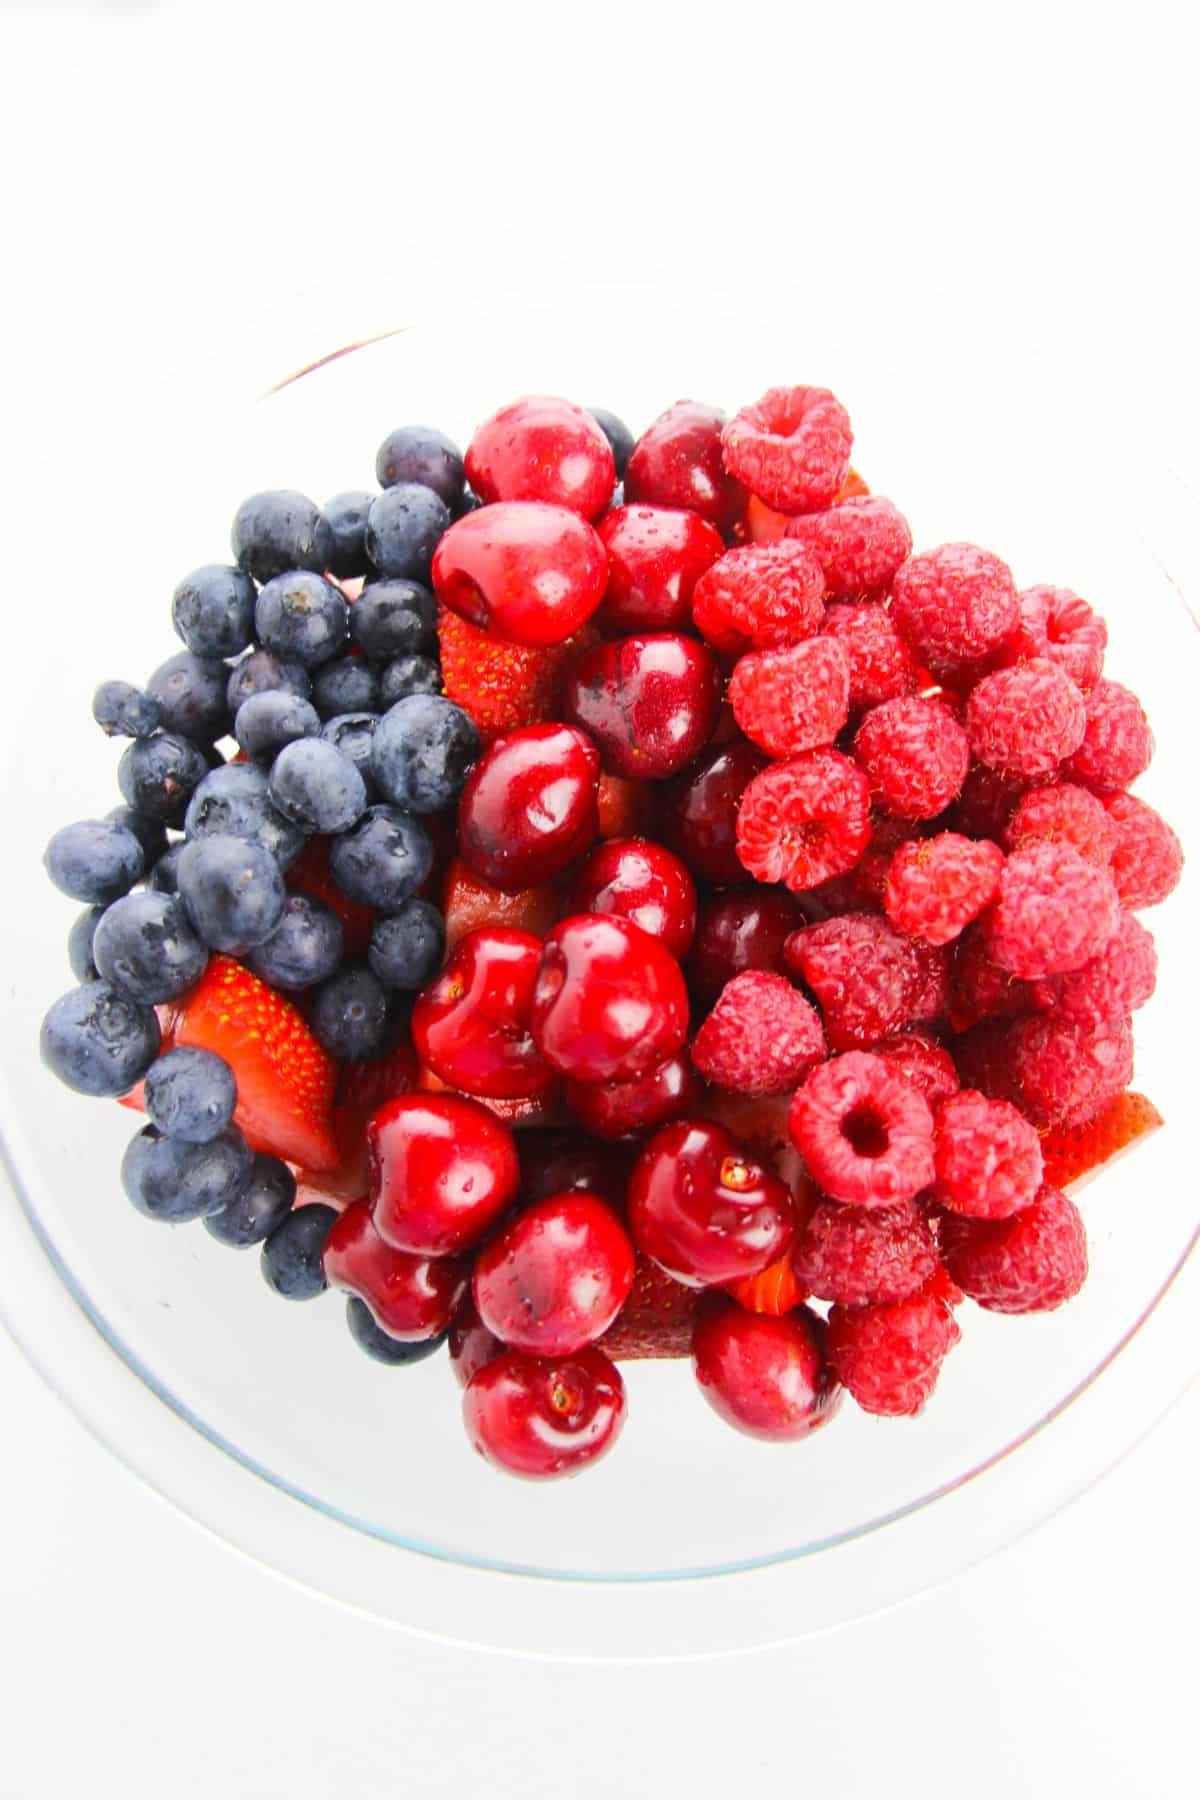 Cherries, raspberries, and blueberries in a large glass mixing bowl